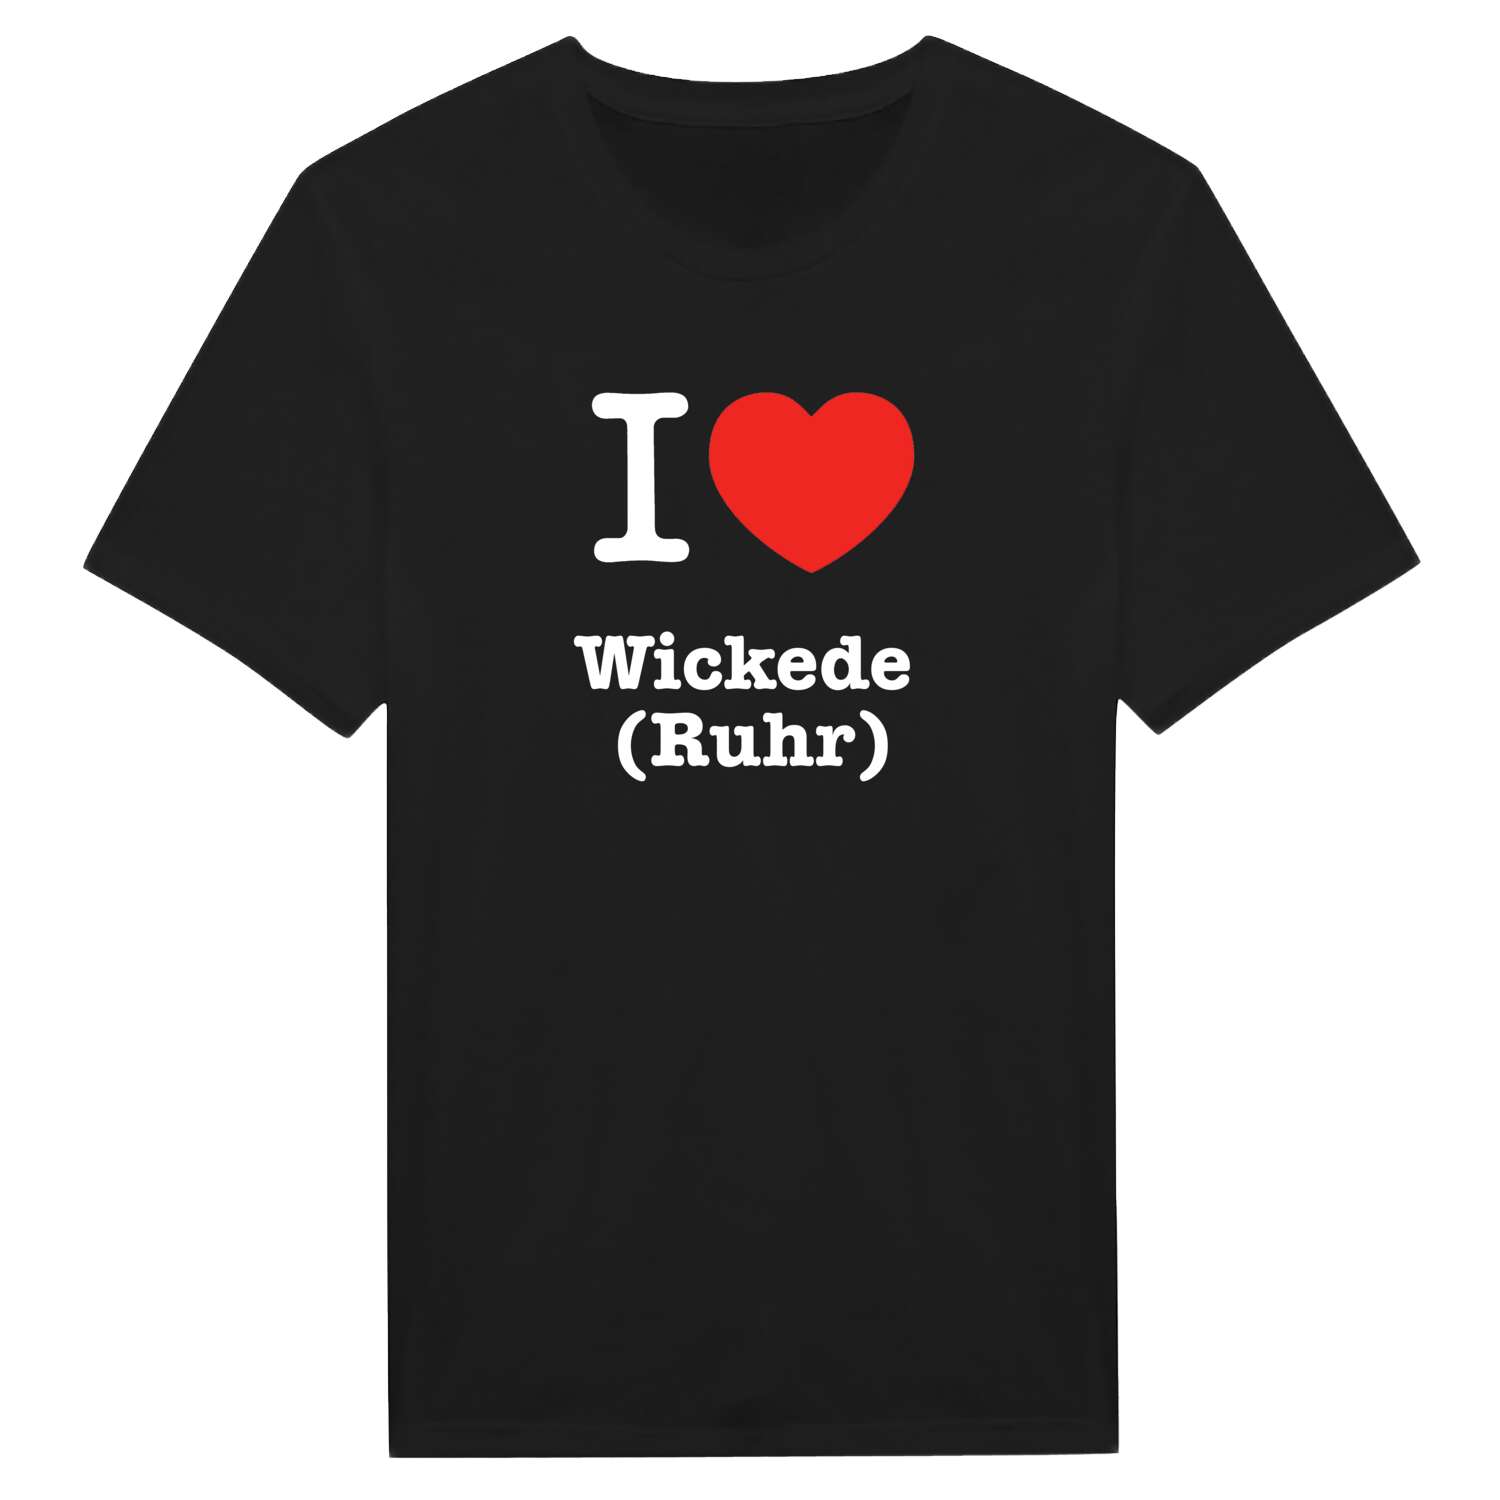 Wickede (Ruhr) T-Shirt »I love«